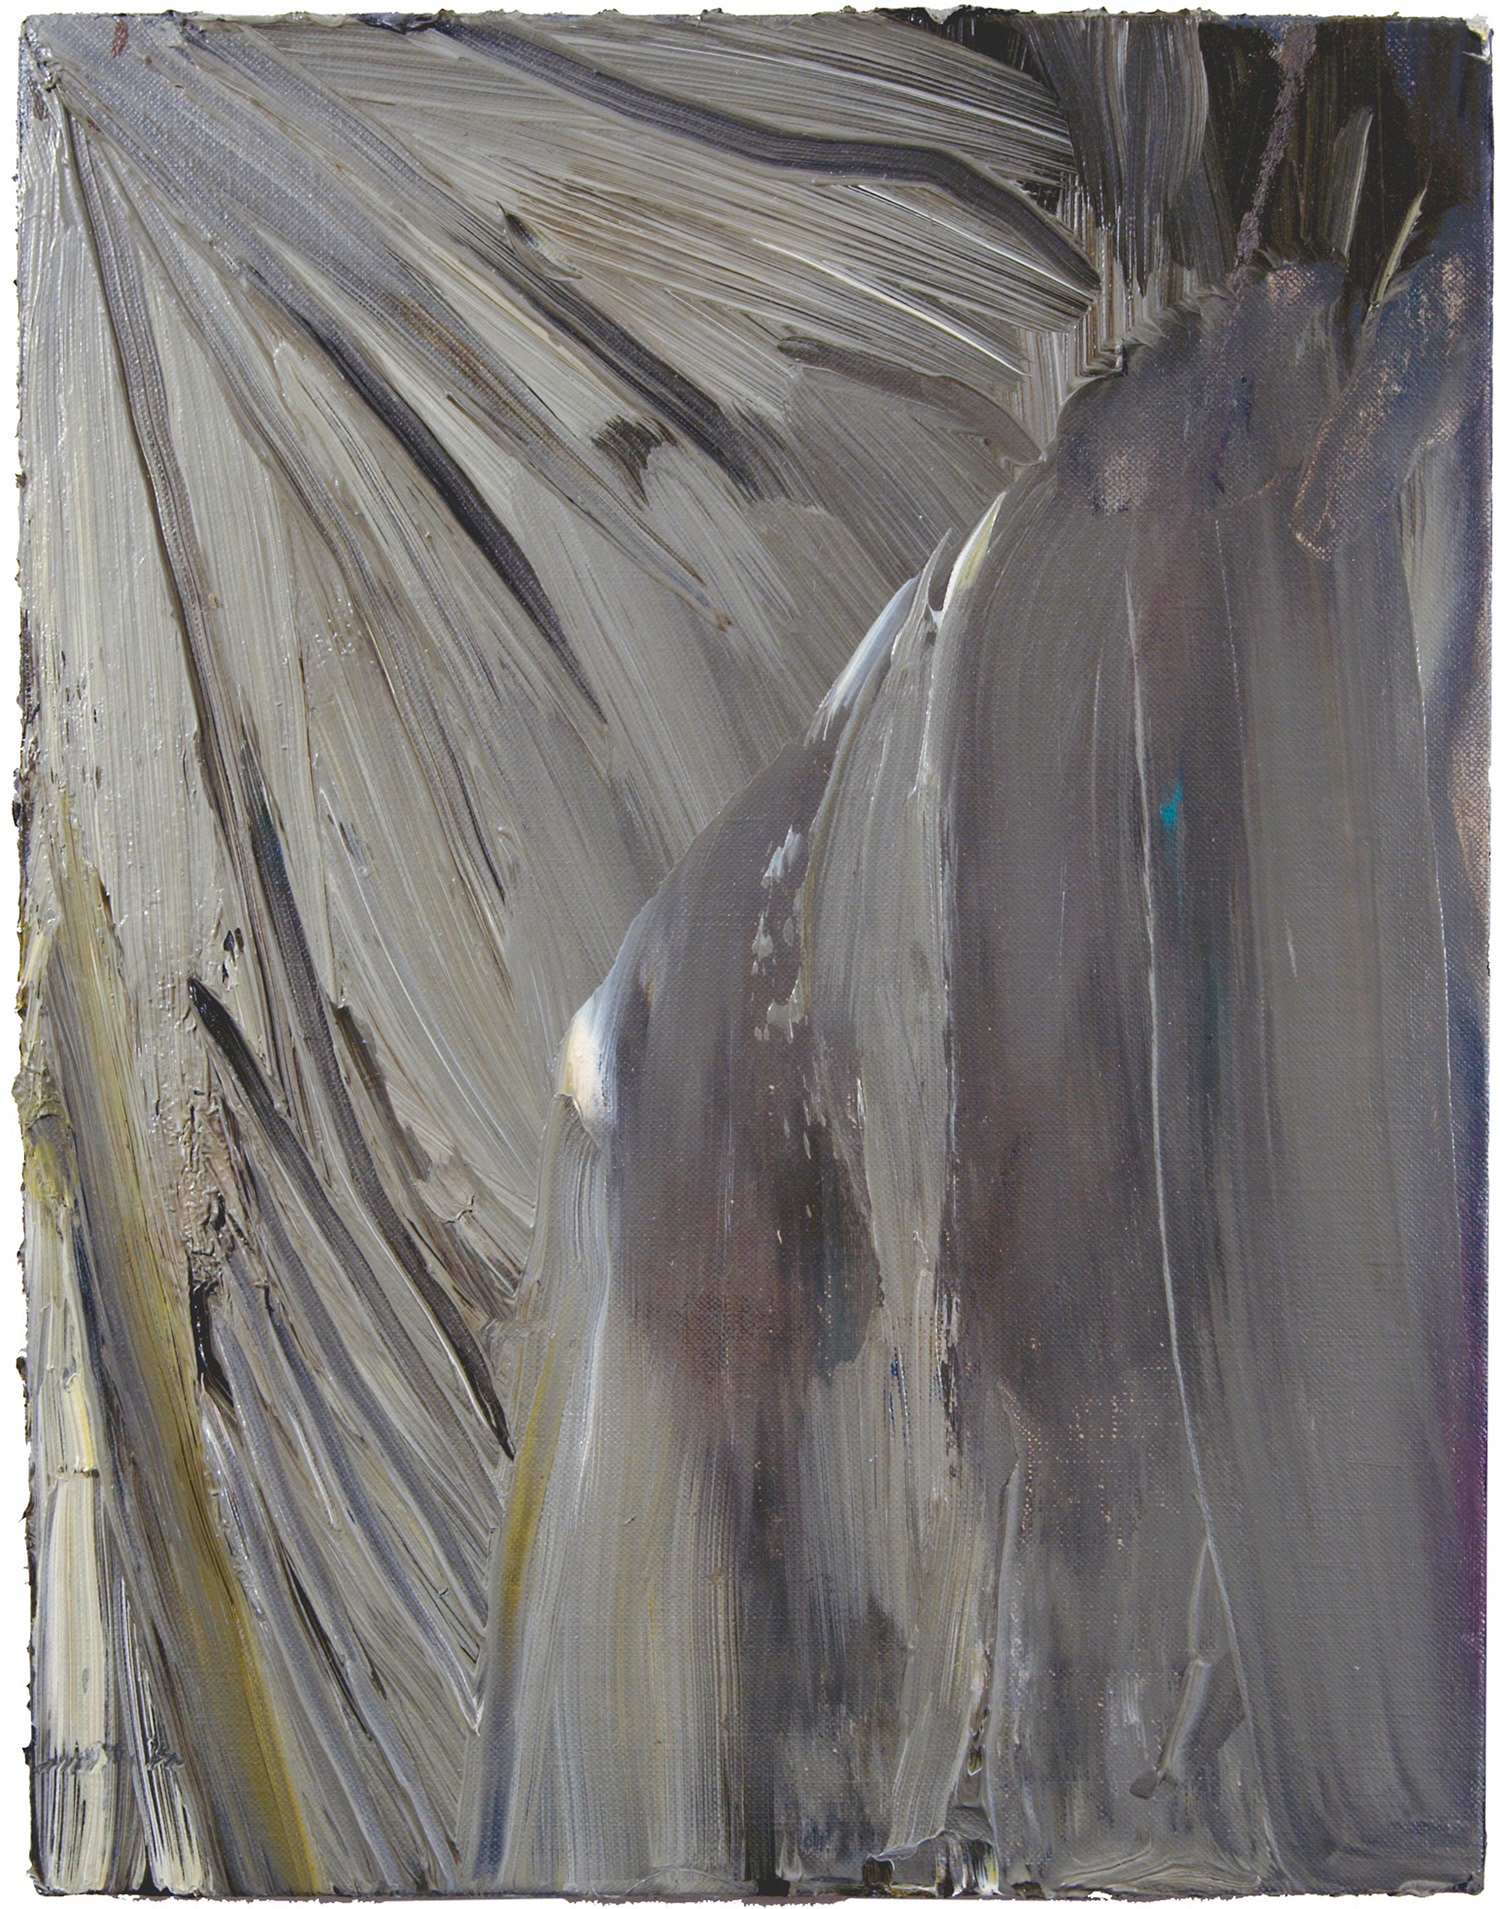   Side , 2006, oil on canvas, 16 x 12 inches 